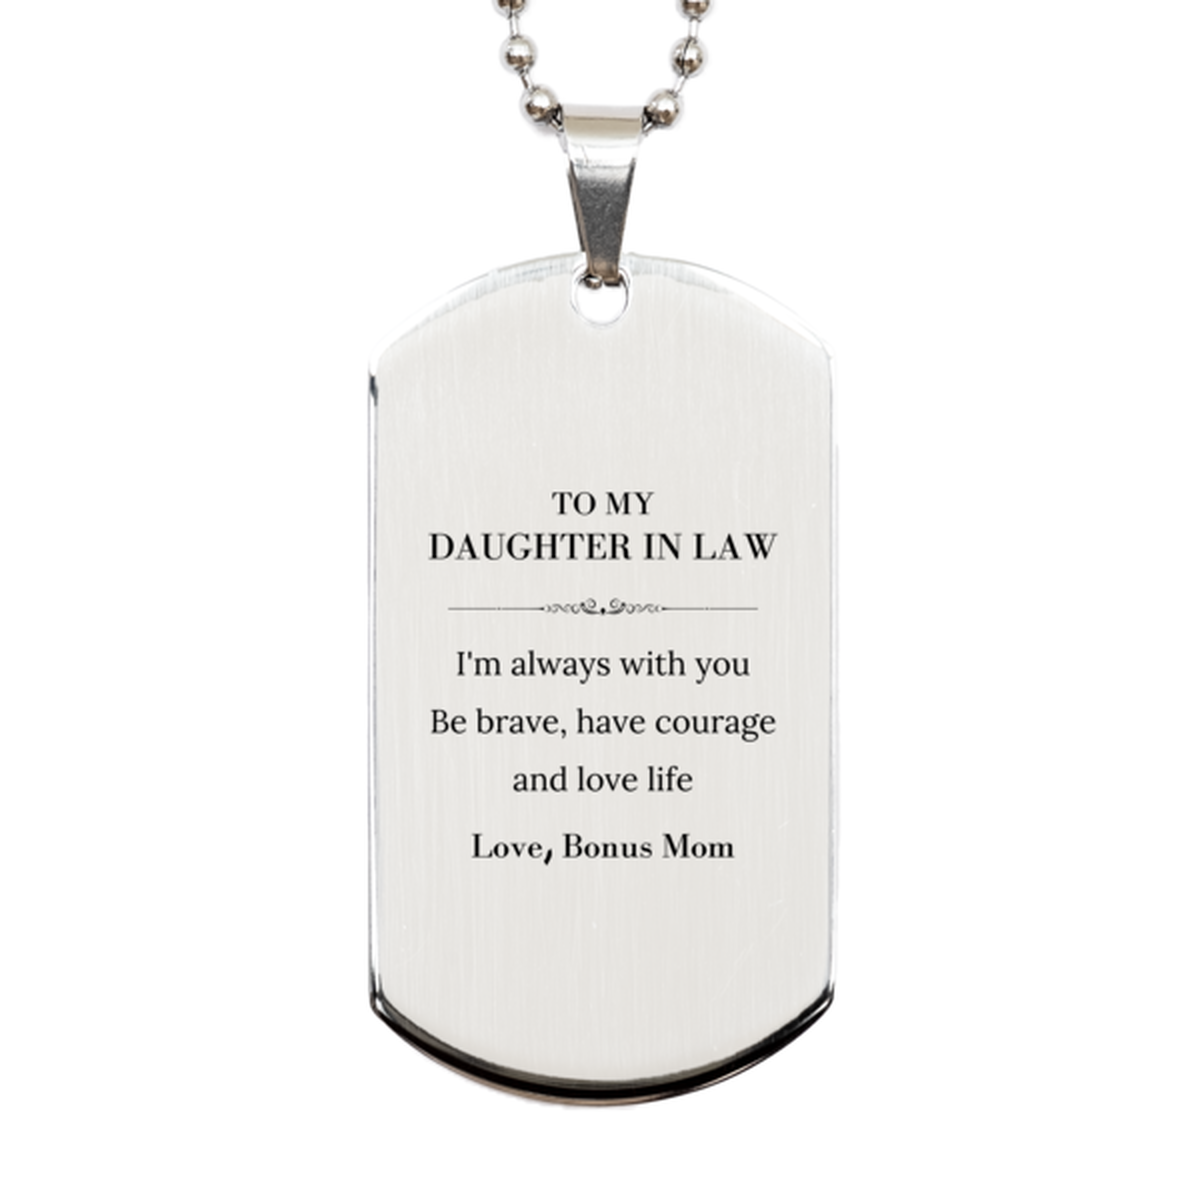 To My Daughter In Law Gifts from Bonus Mom, Unique Silver Dog Tag Inspirational Christmas Birthday Graduation Gifts for Daughter In Law I'm always with you. Be brave, have courage and love life. Love, Bonus Mom